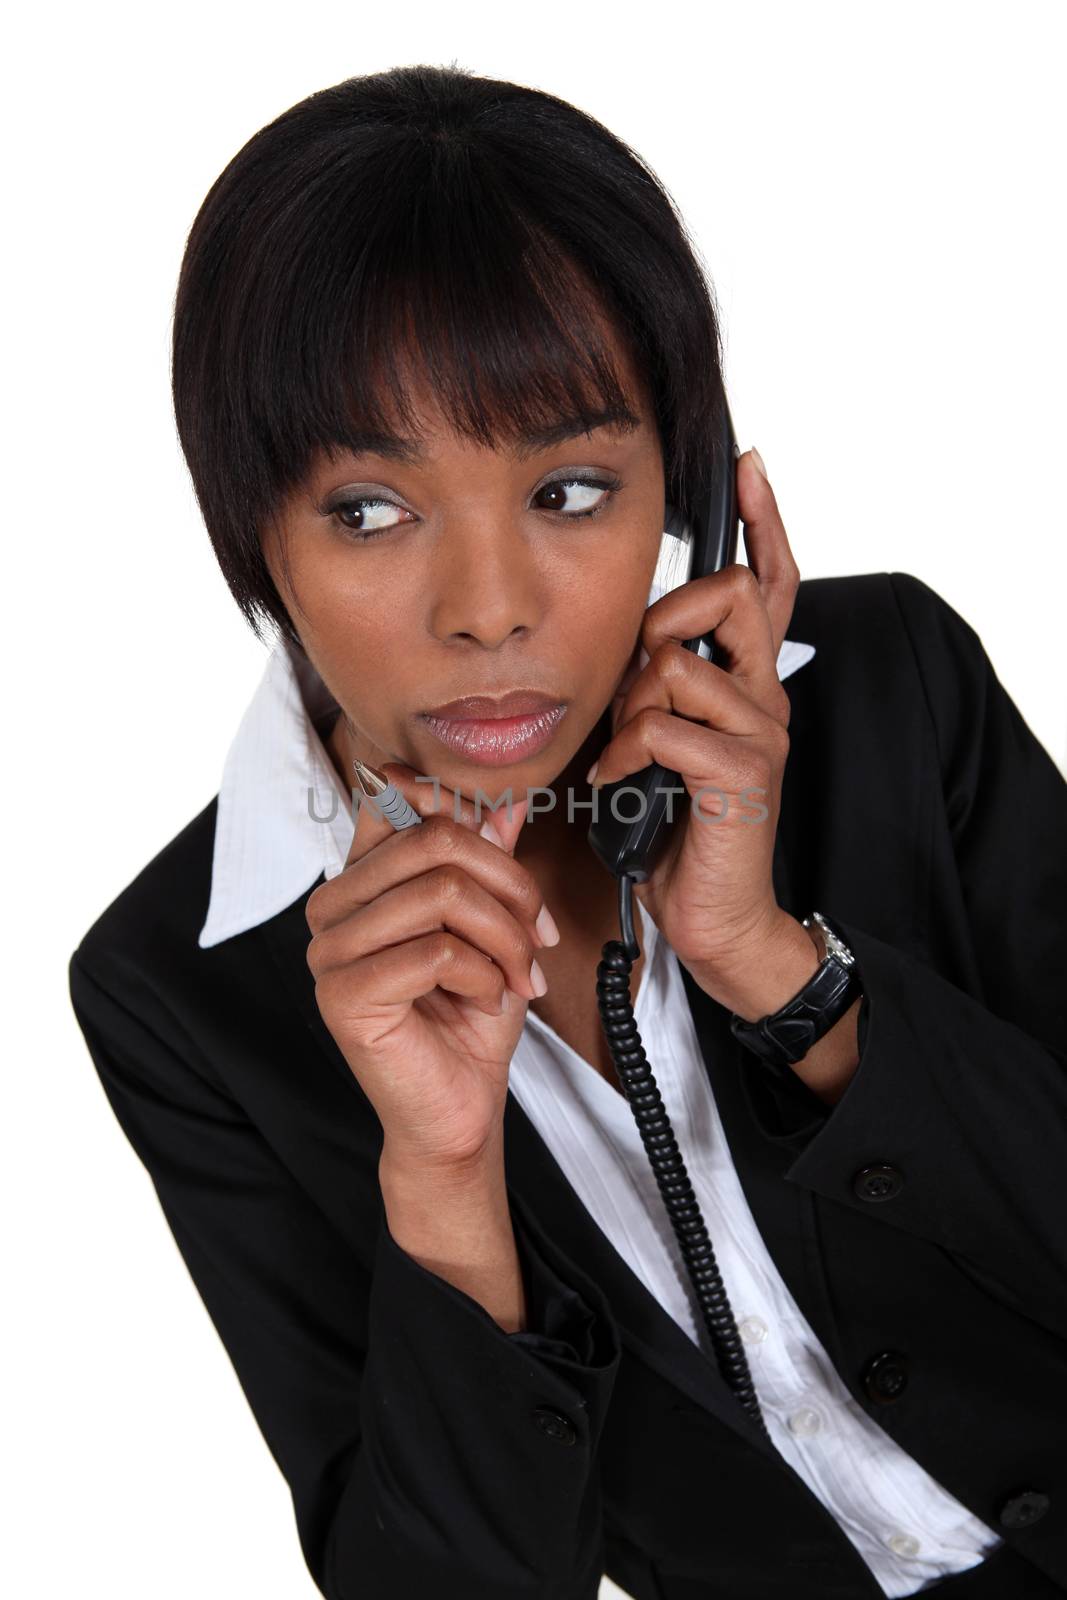 Woman paying attention during phone call